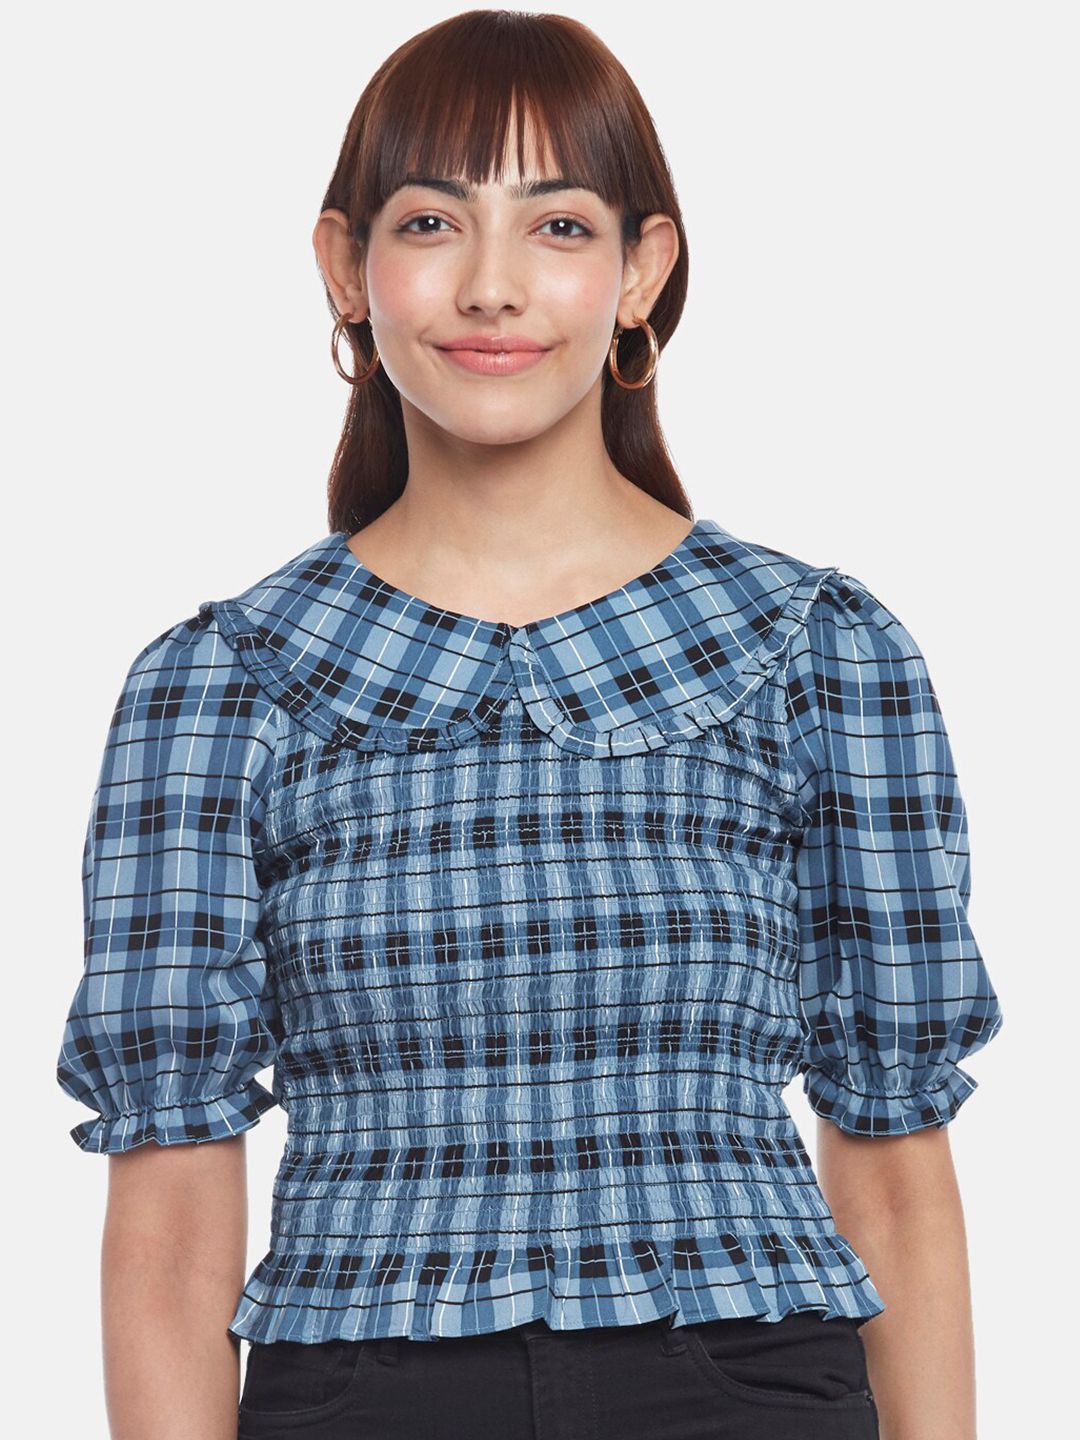 Honey by Pantaloons Blue Checked Peter Pan Collar Blouson Top Price in India